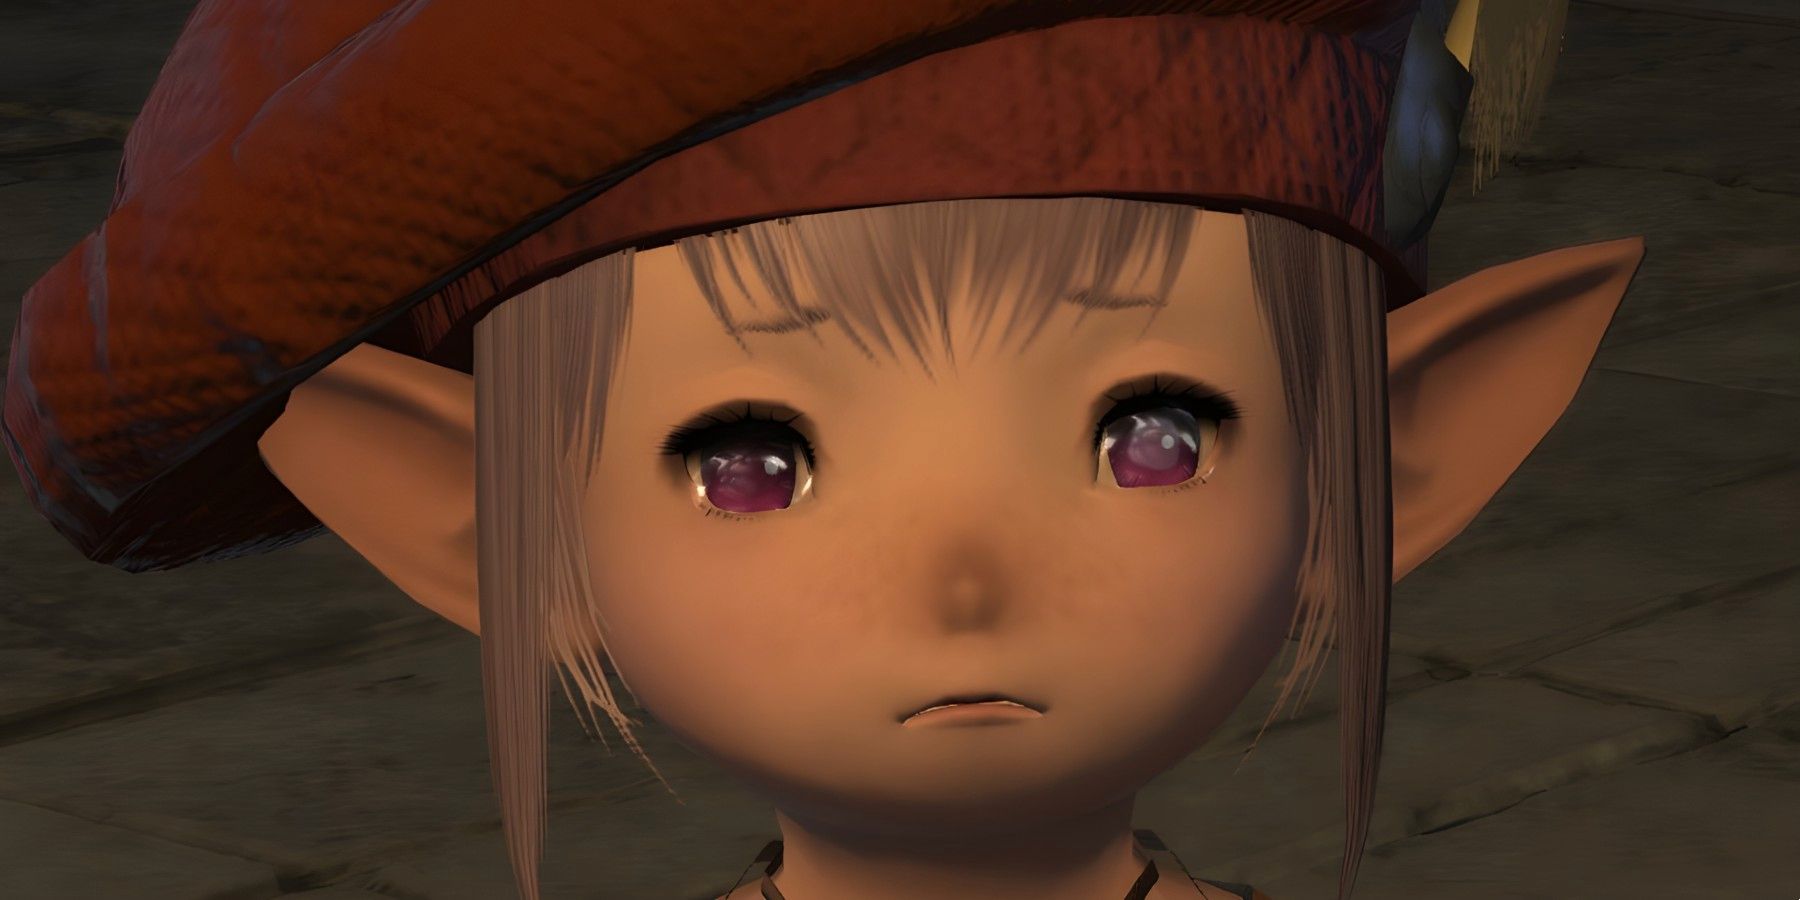 Final Fantasy 14 Image is Good Reminder to Always Make Sure There is Space in Your Inventory